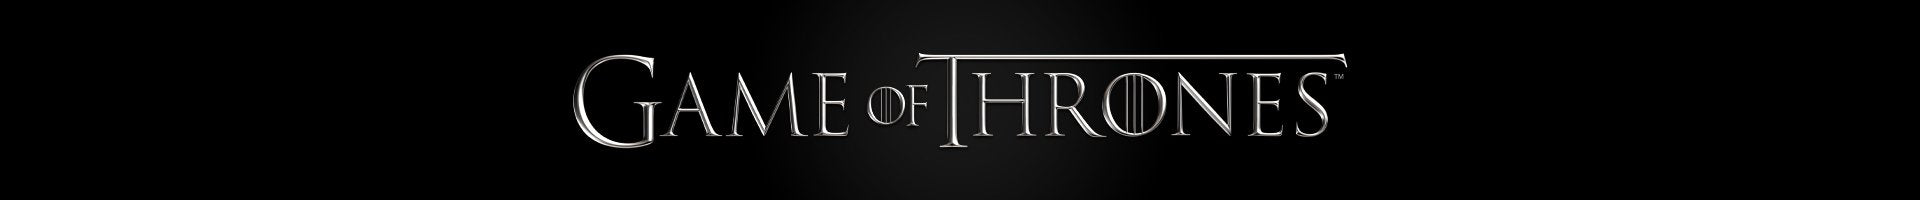 Game of Thrones | Shop Tees, Mugs, and More | Official WB Shop UK